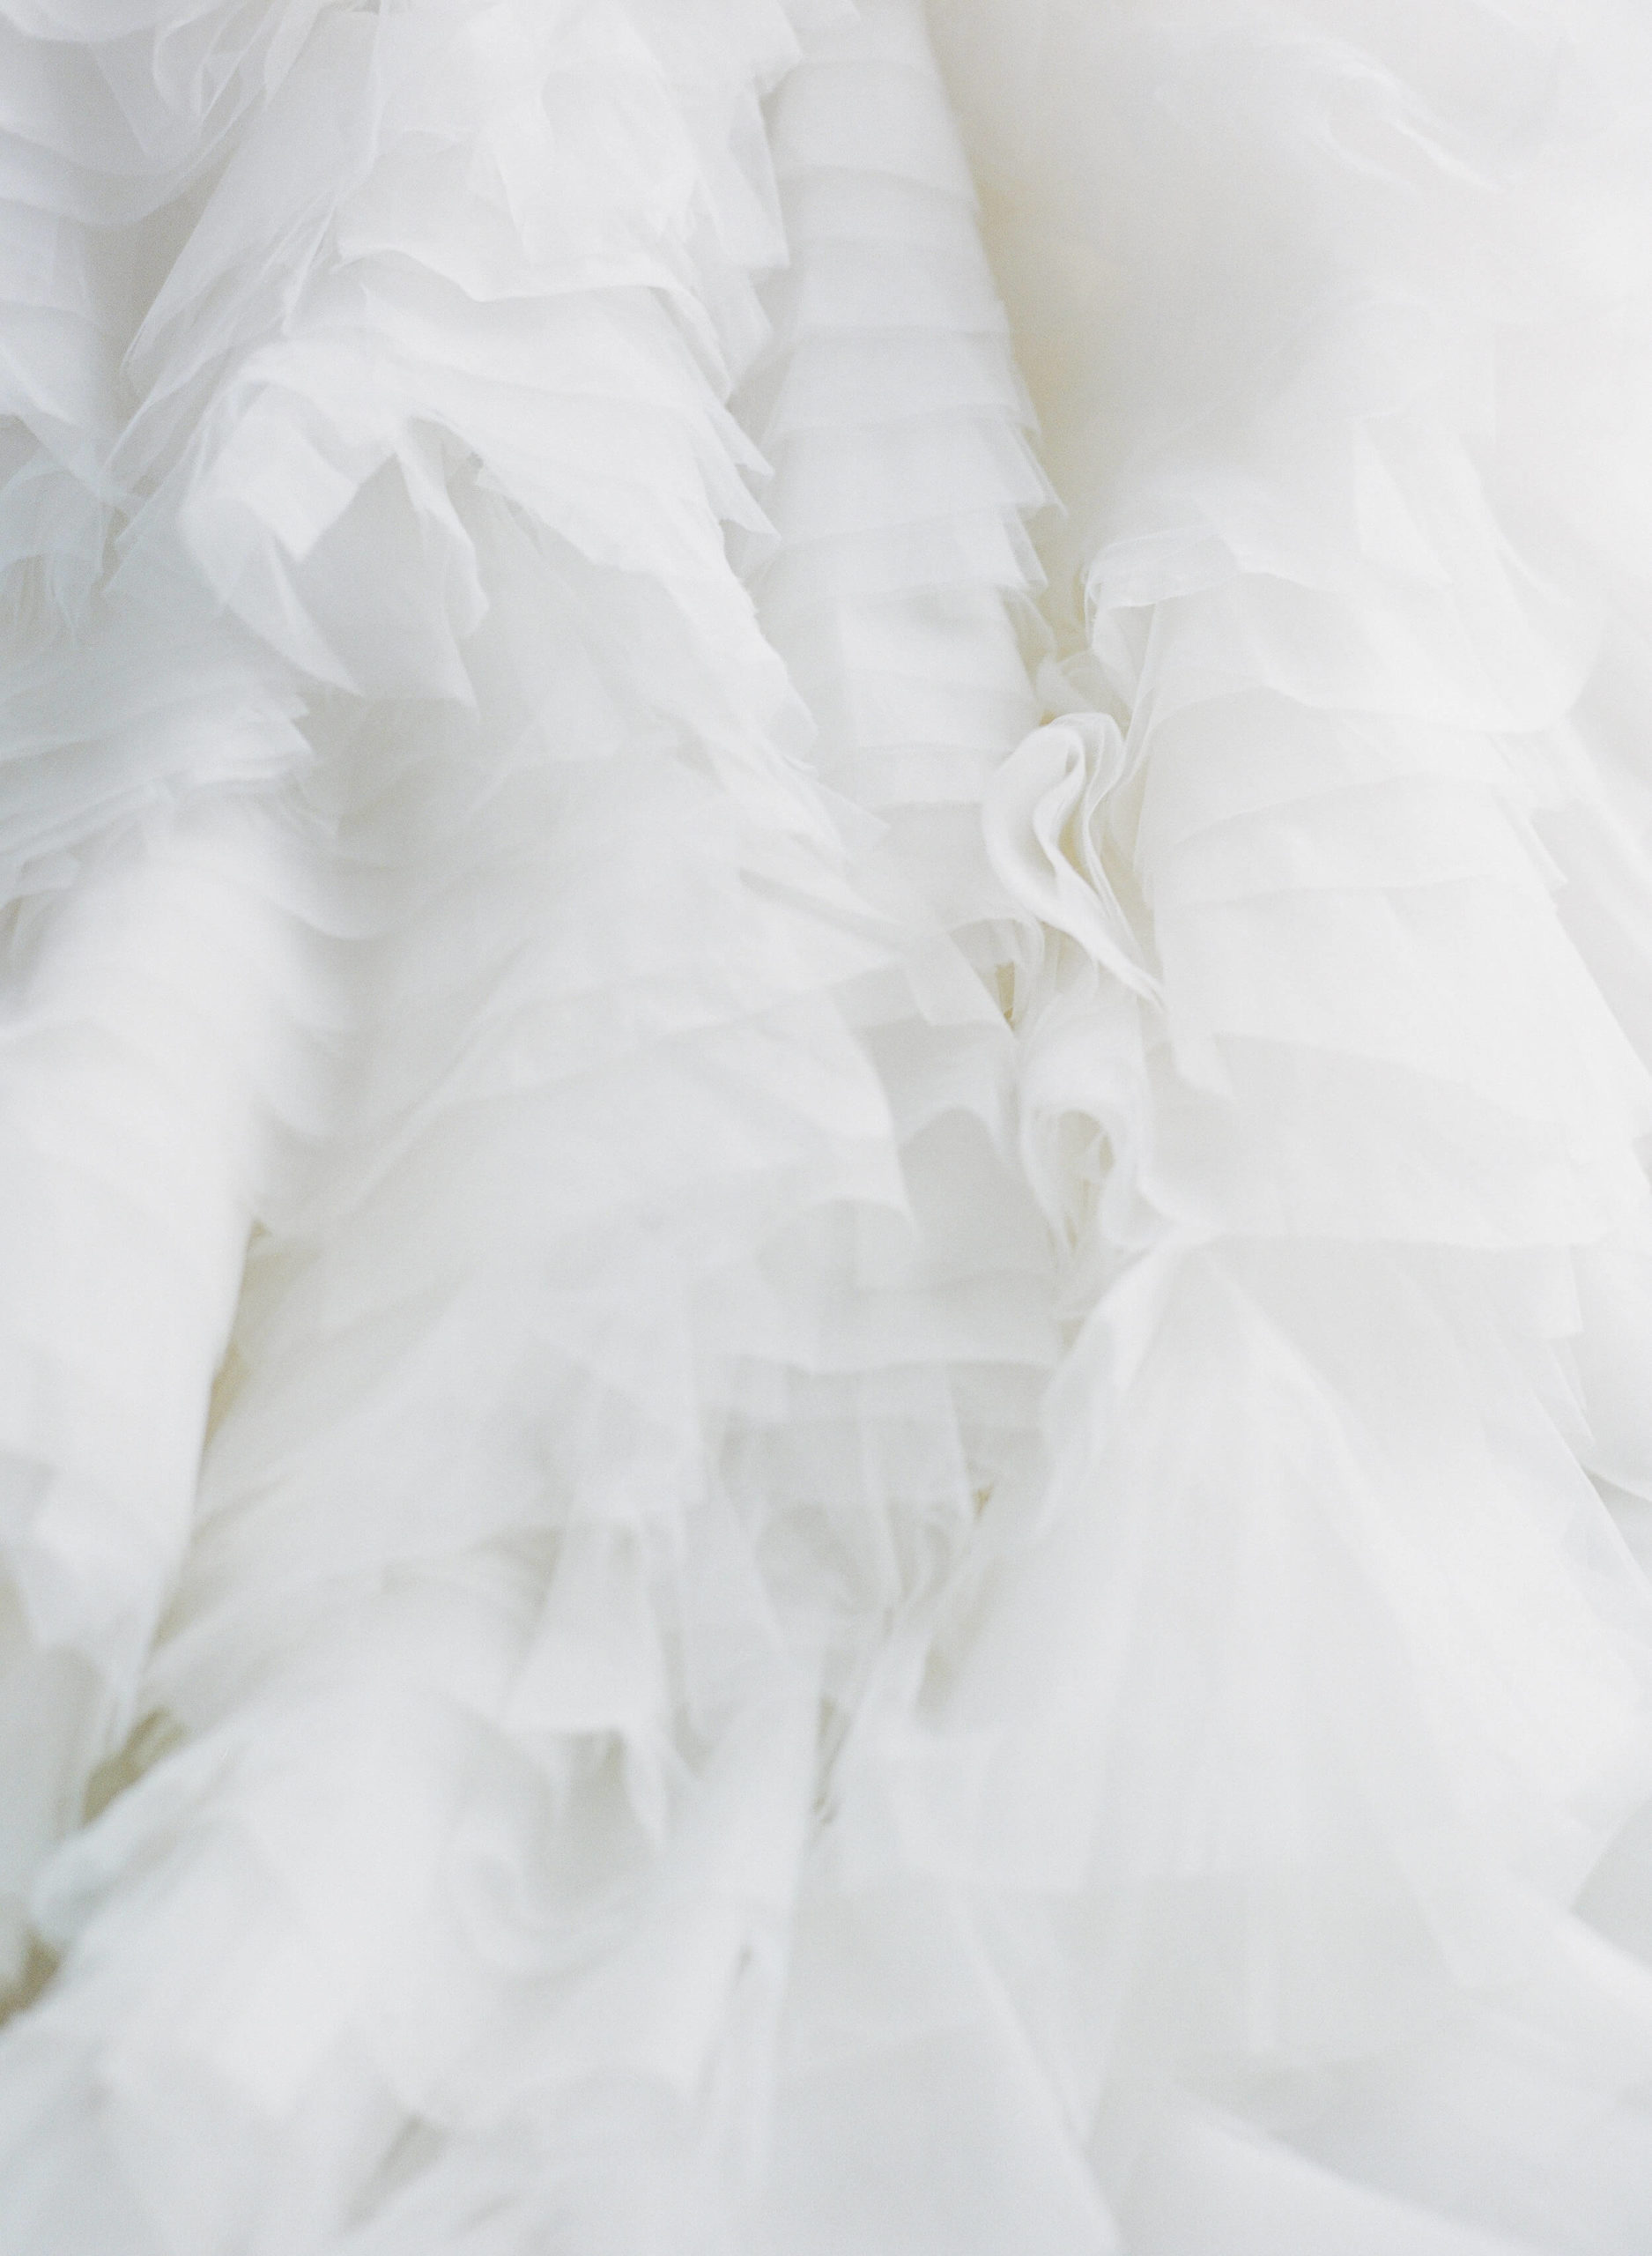 layers of white tulle